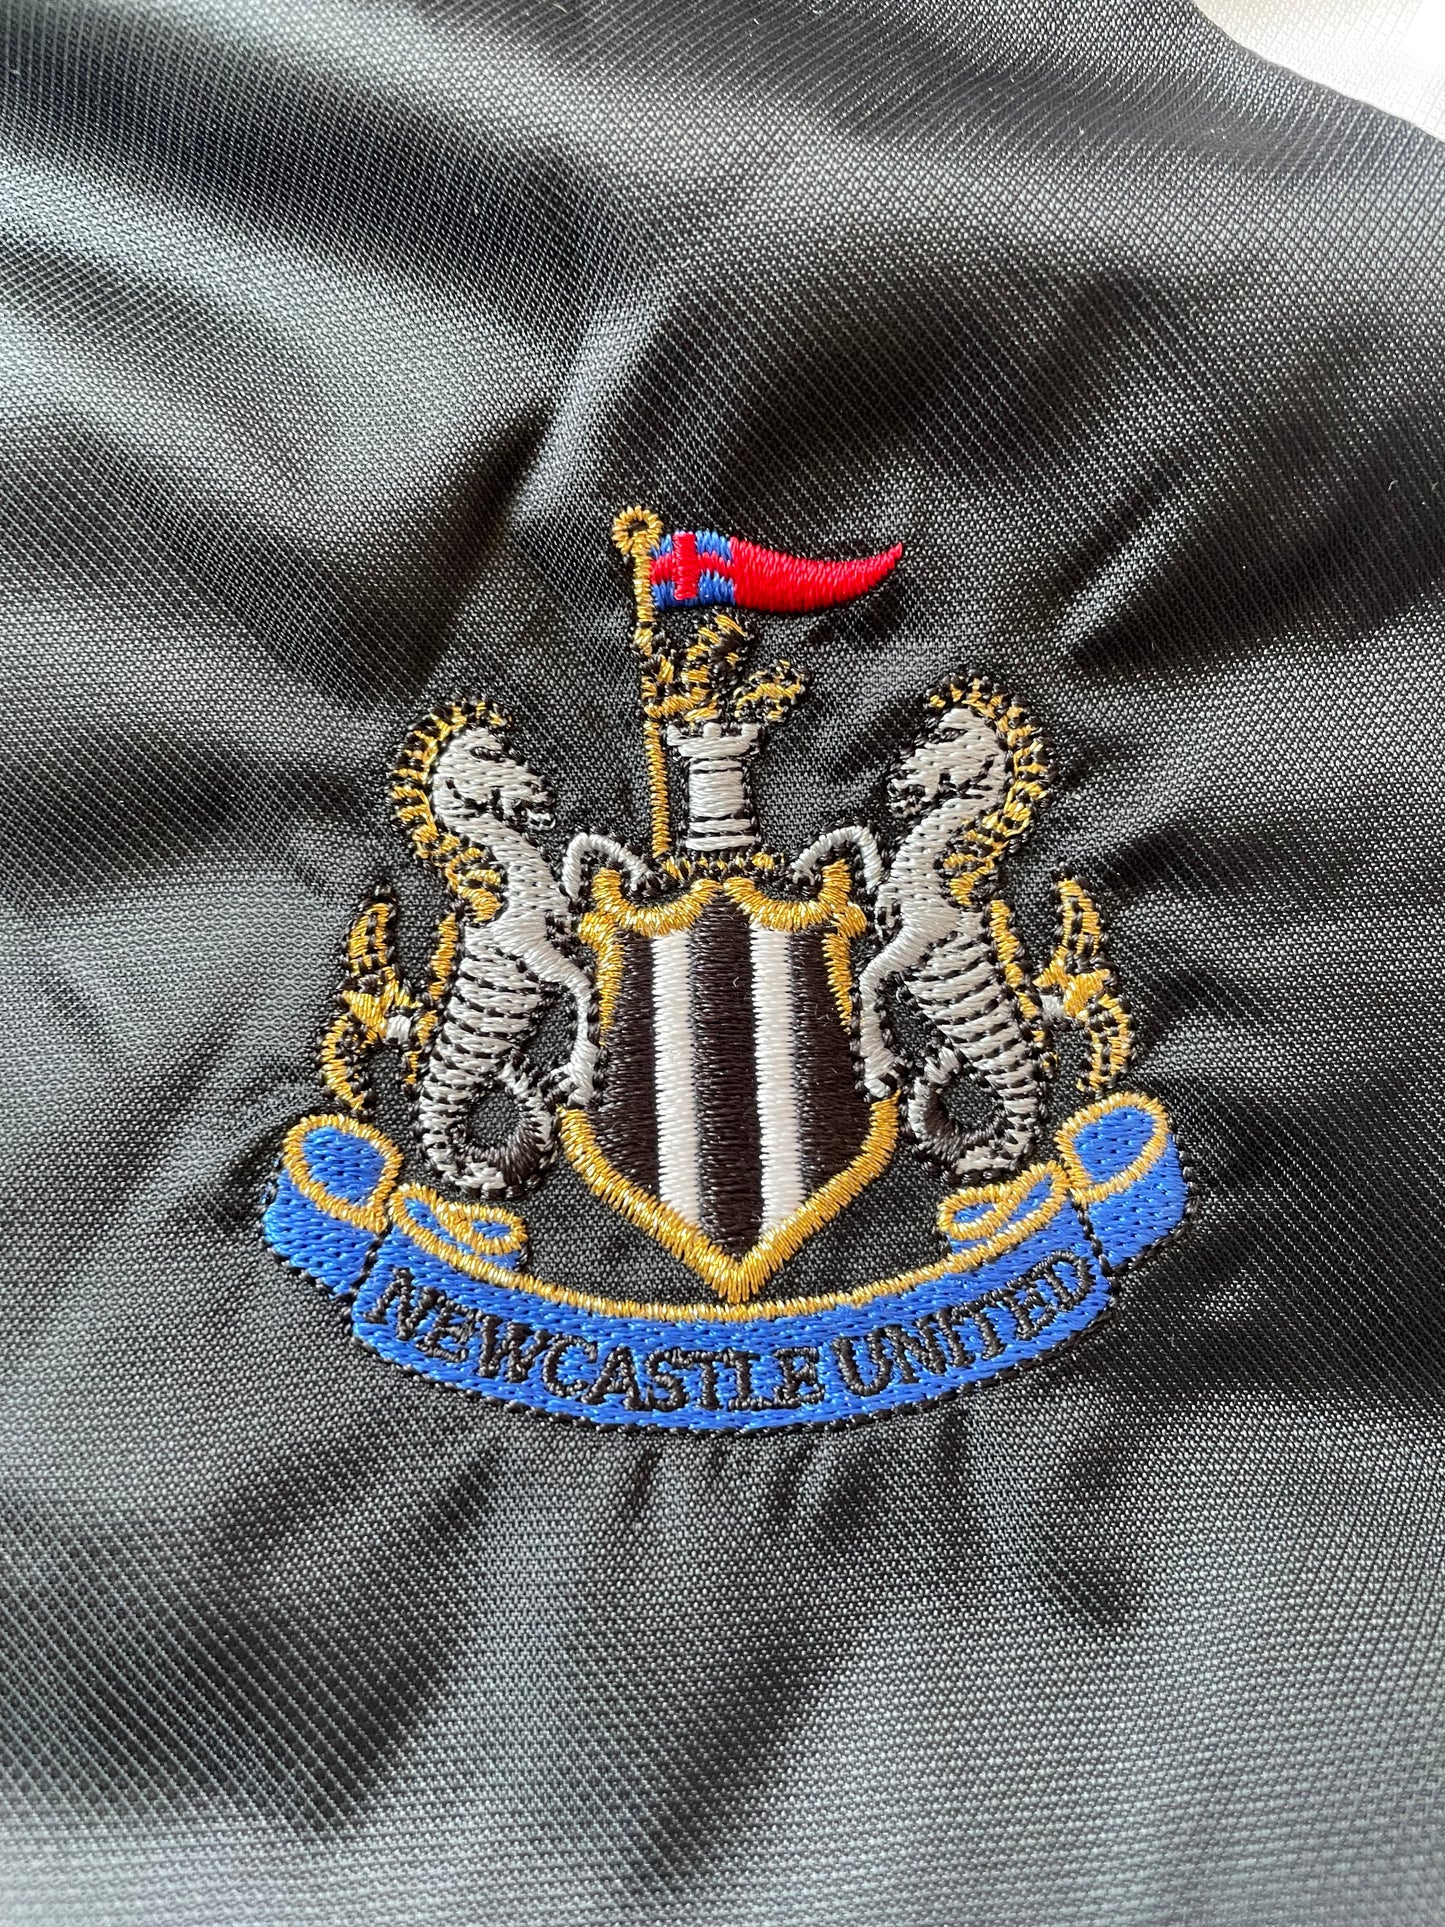 Newcastle Bench Coat 2000/01 (excellent) Adults XS 32/34 158